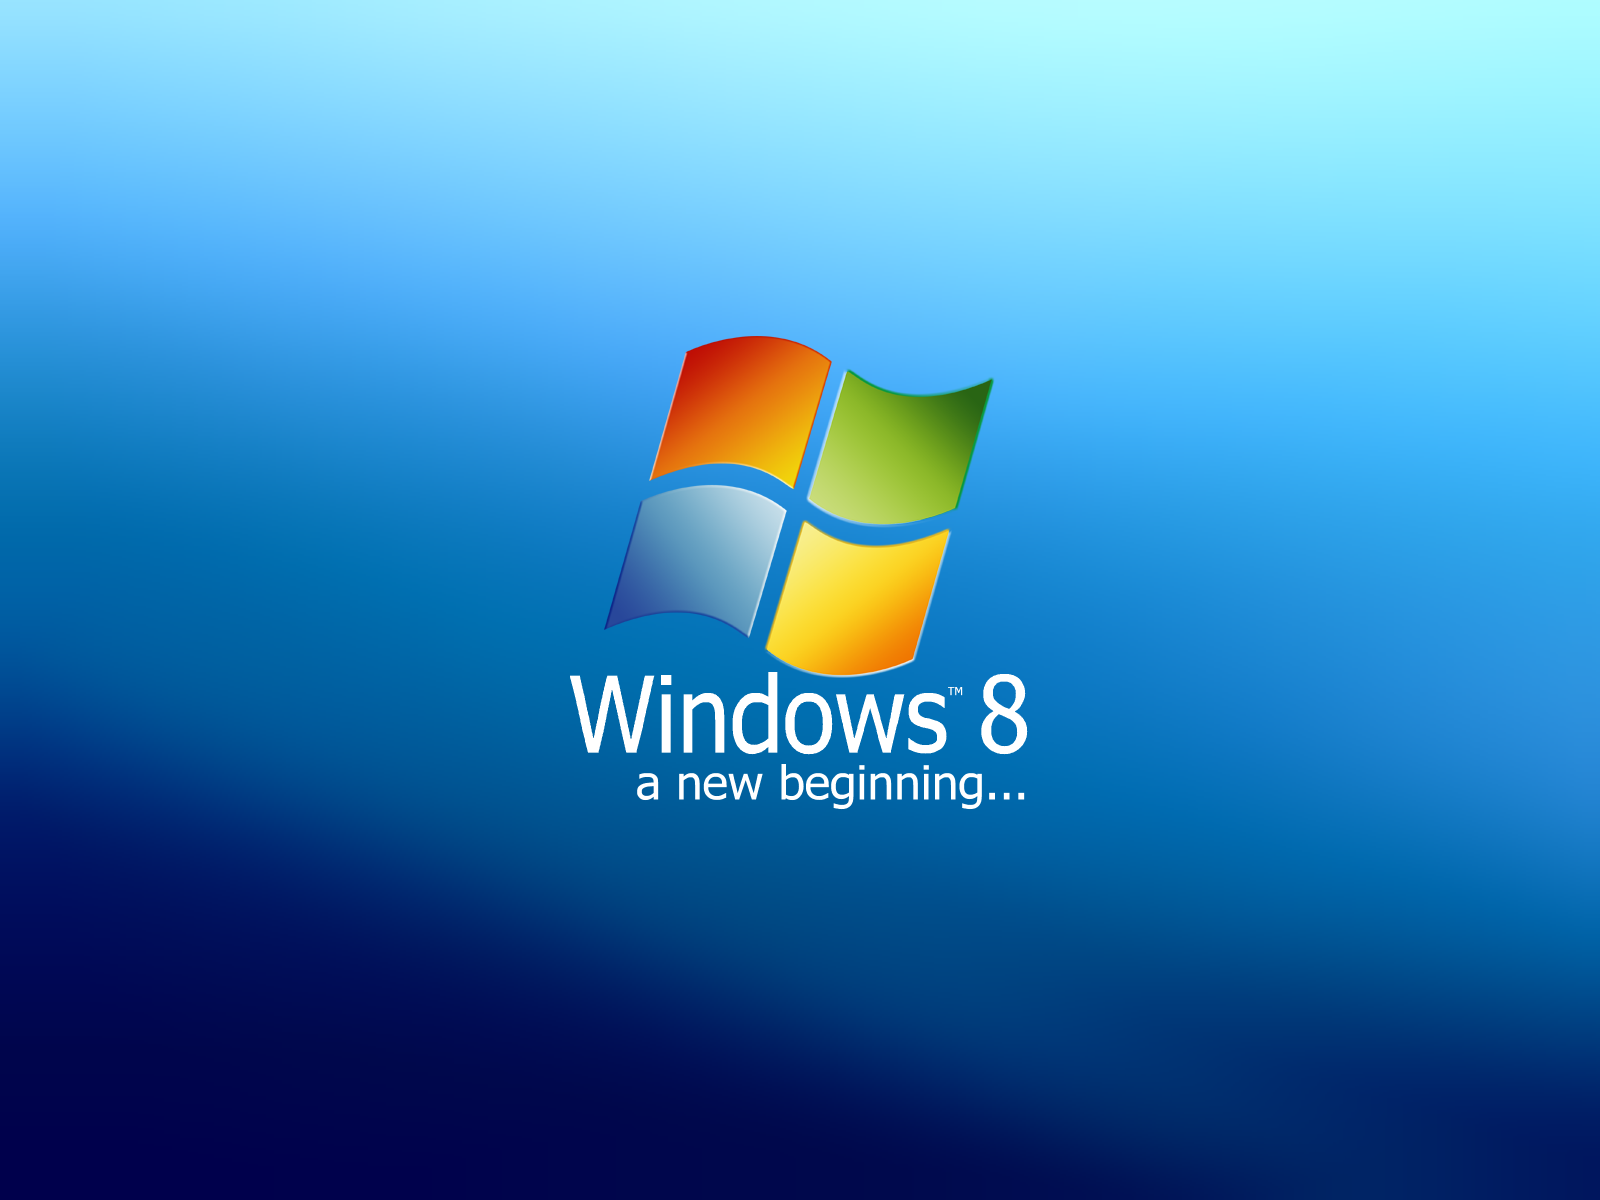 Welcome to Building Windows 8